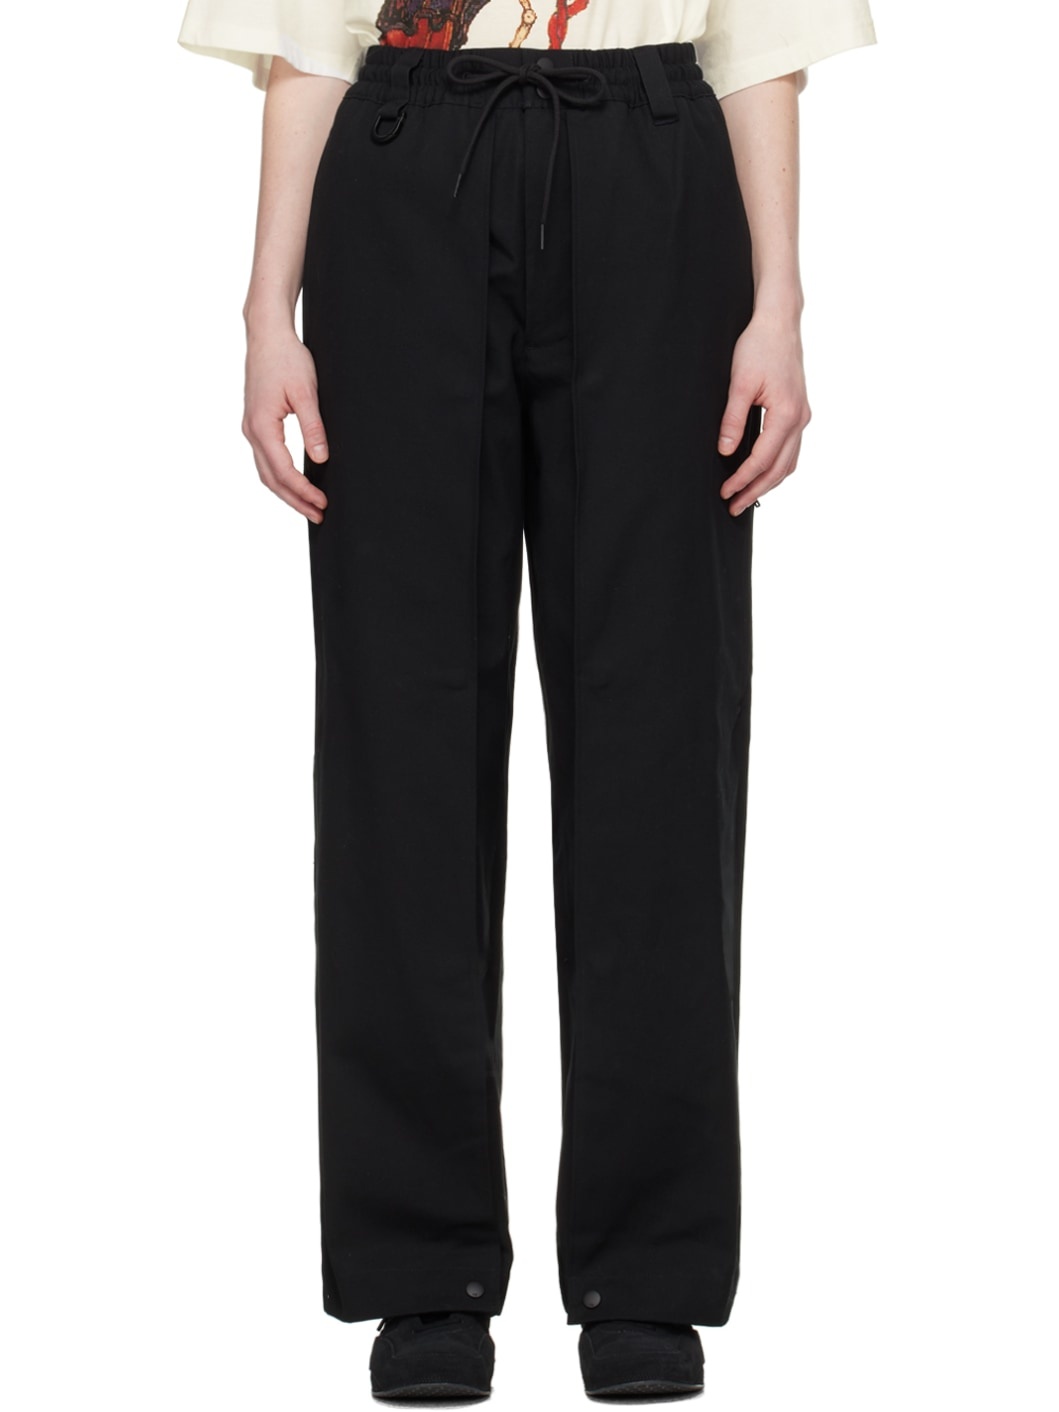 Black Layered Trousers - 1